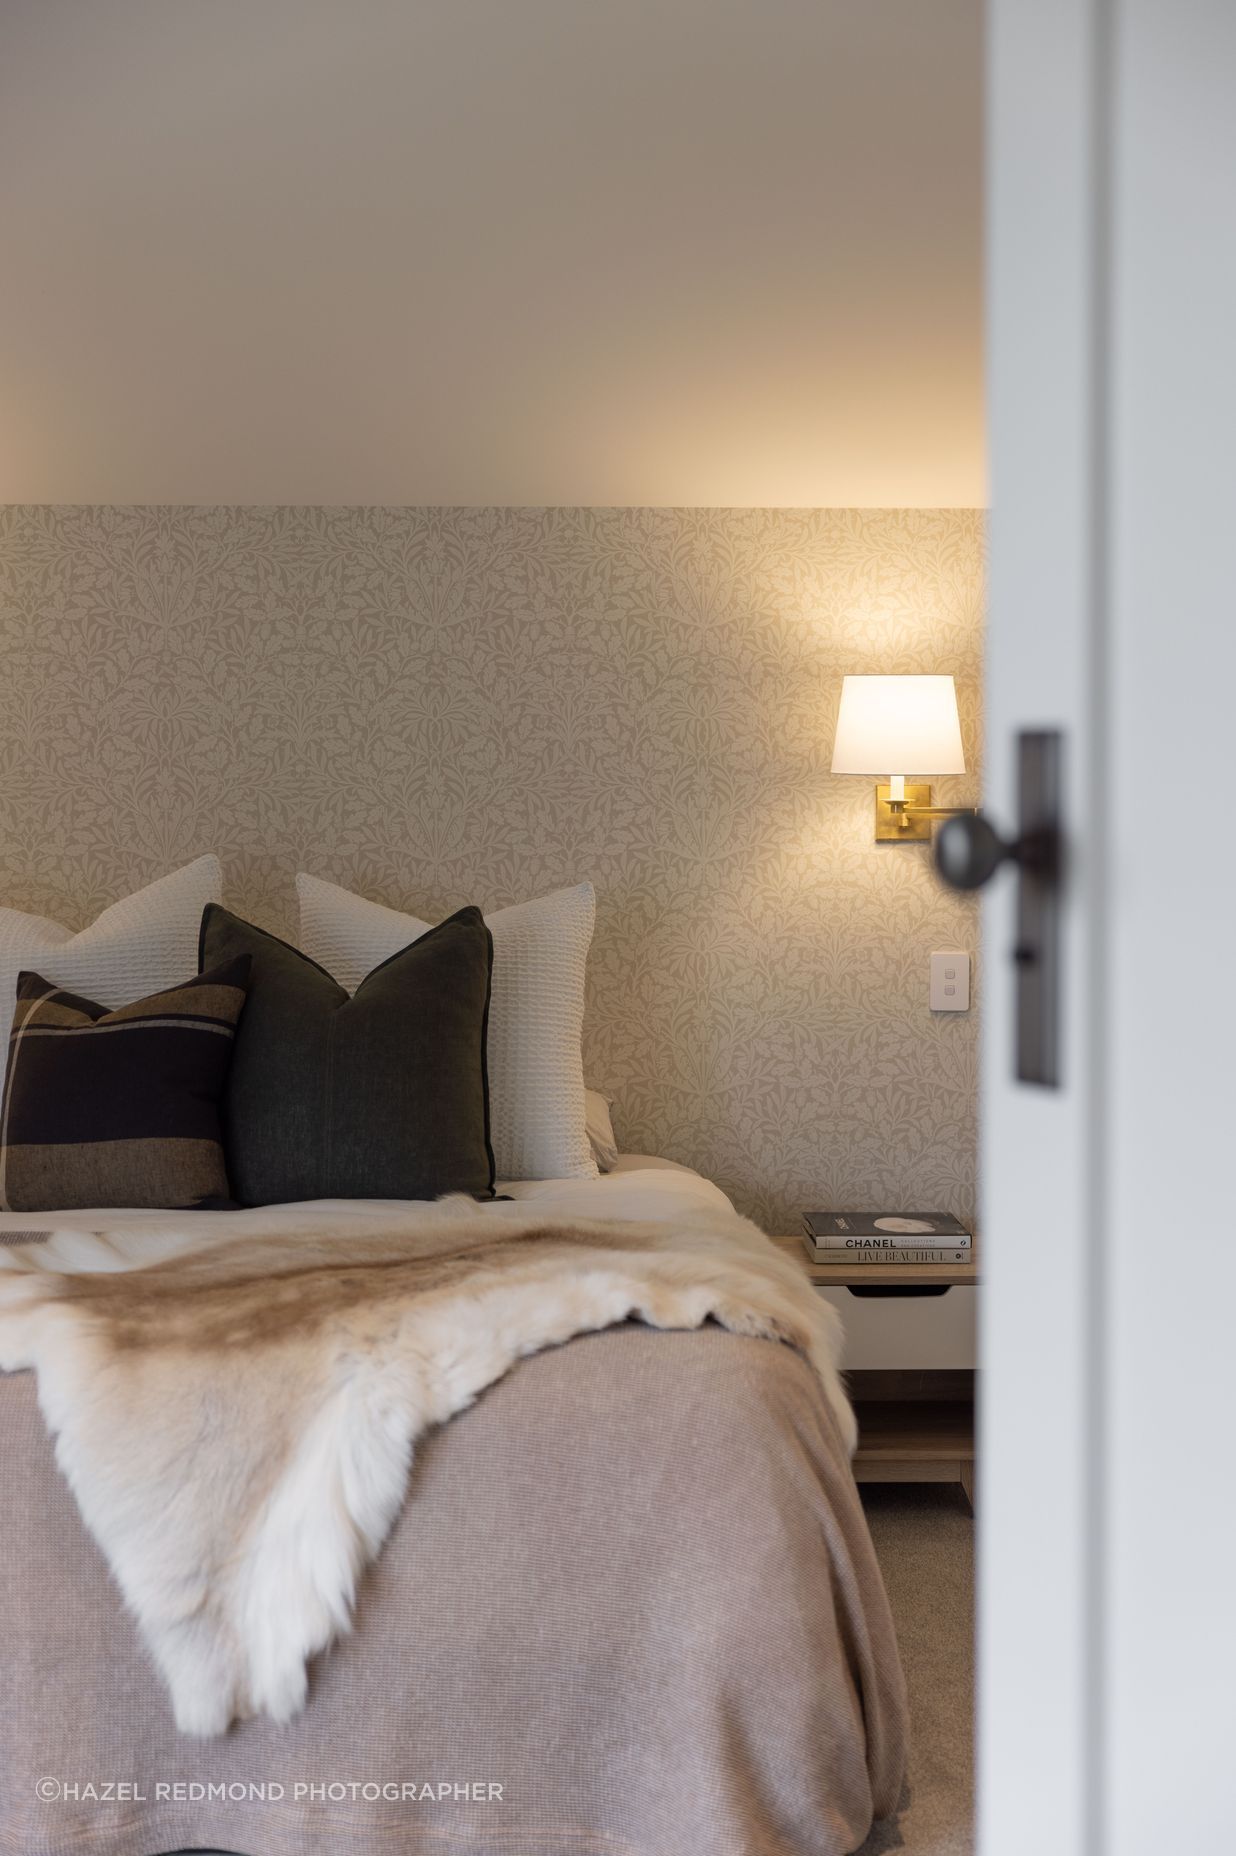 The bedrooms have a hotel-like feel with soft, ambient lighting and elegant wallpaper.